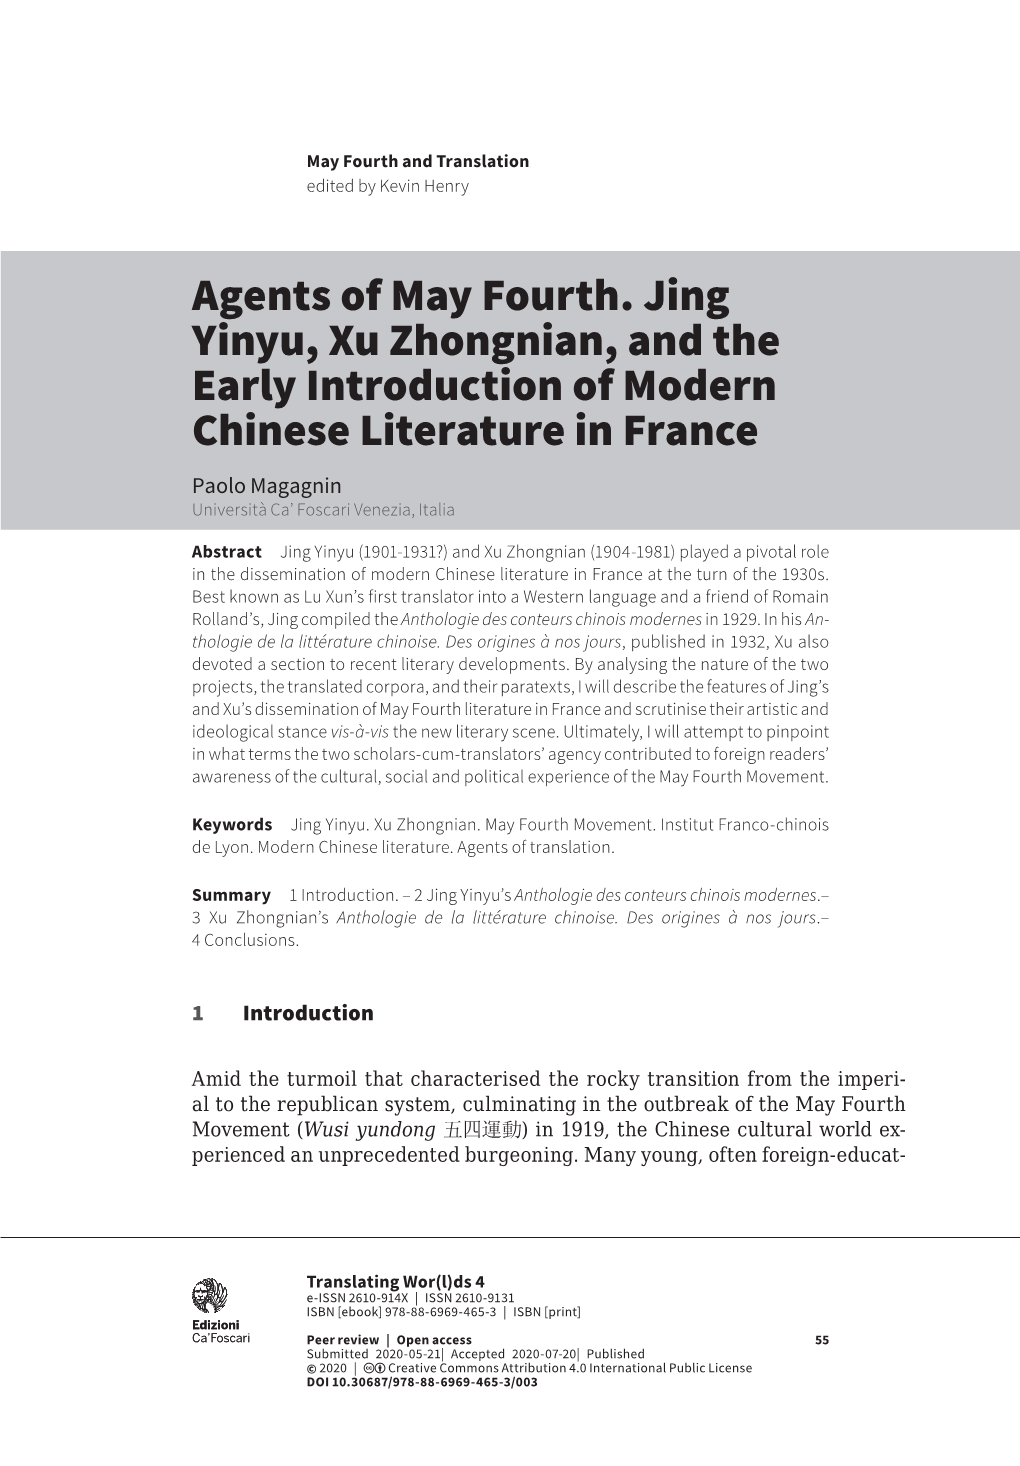 Agents of May Fourth. Jing Yinyu, Xu Zhongnian, and the Early Introduction of Modern Chinese Literature in France